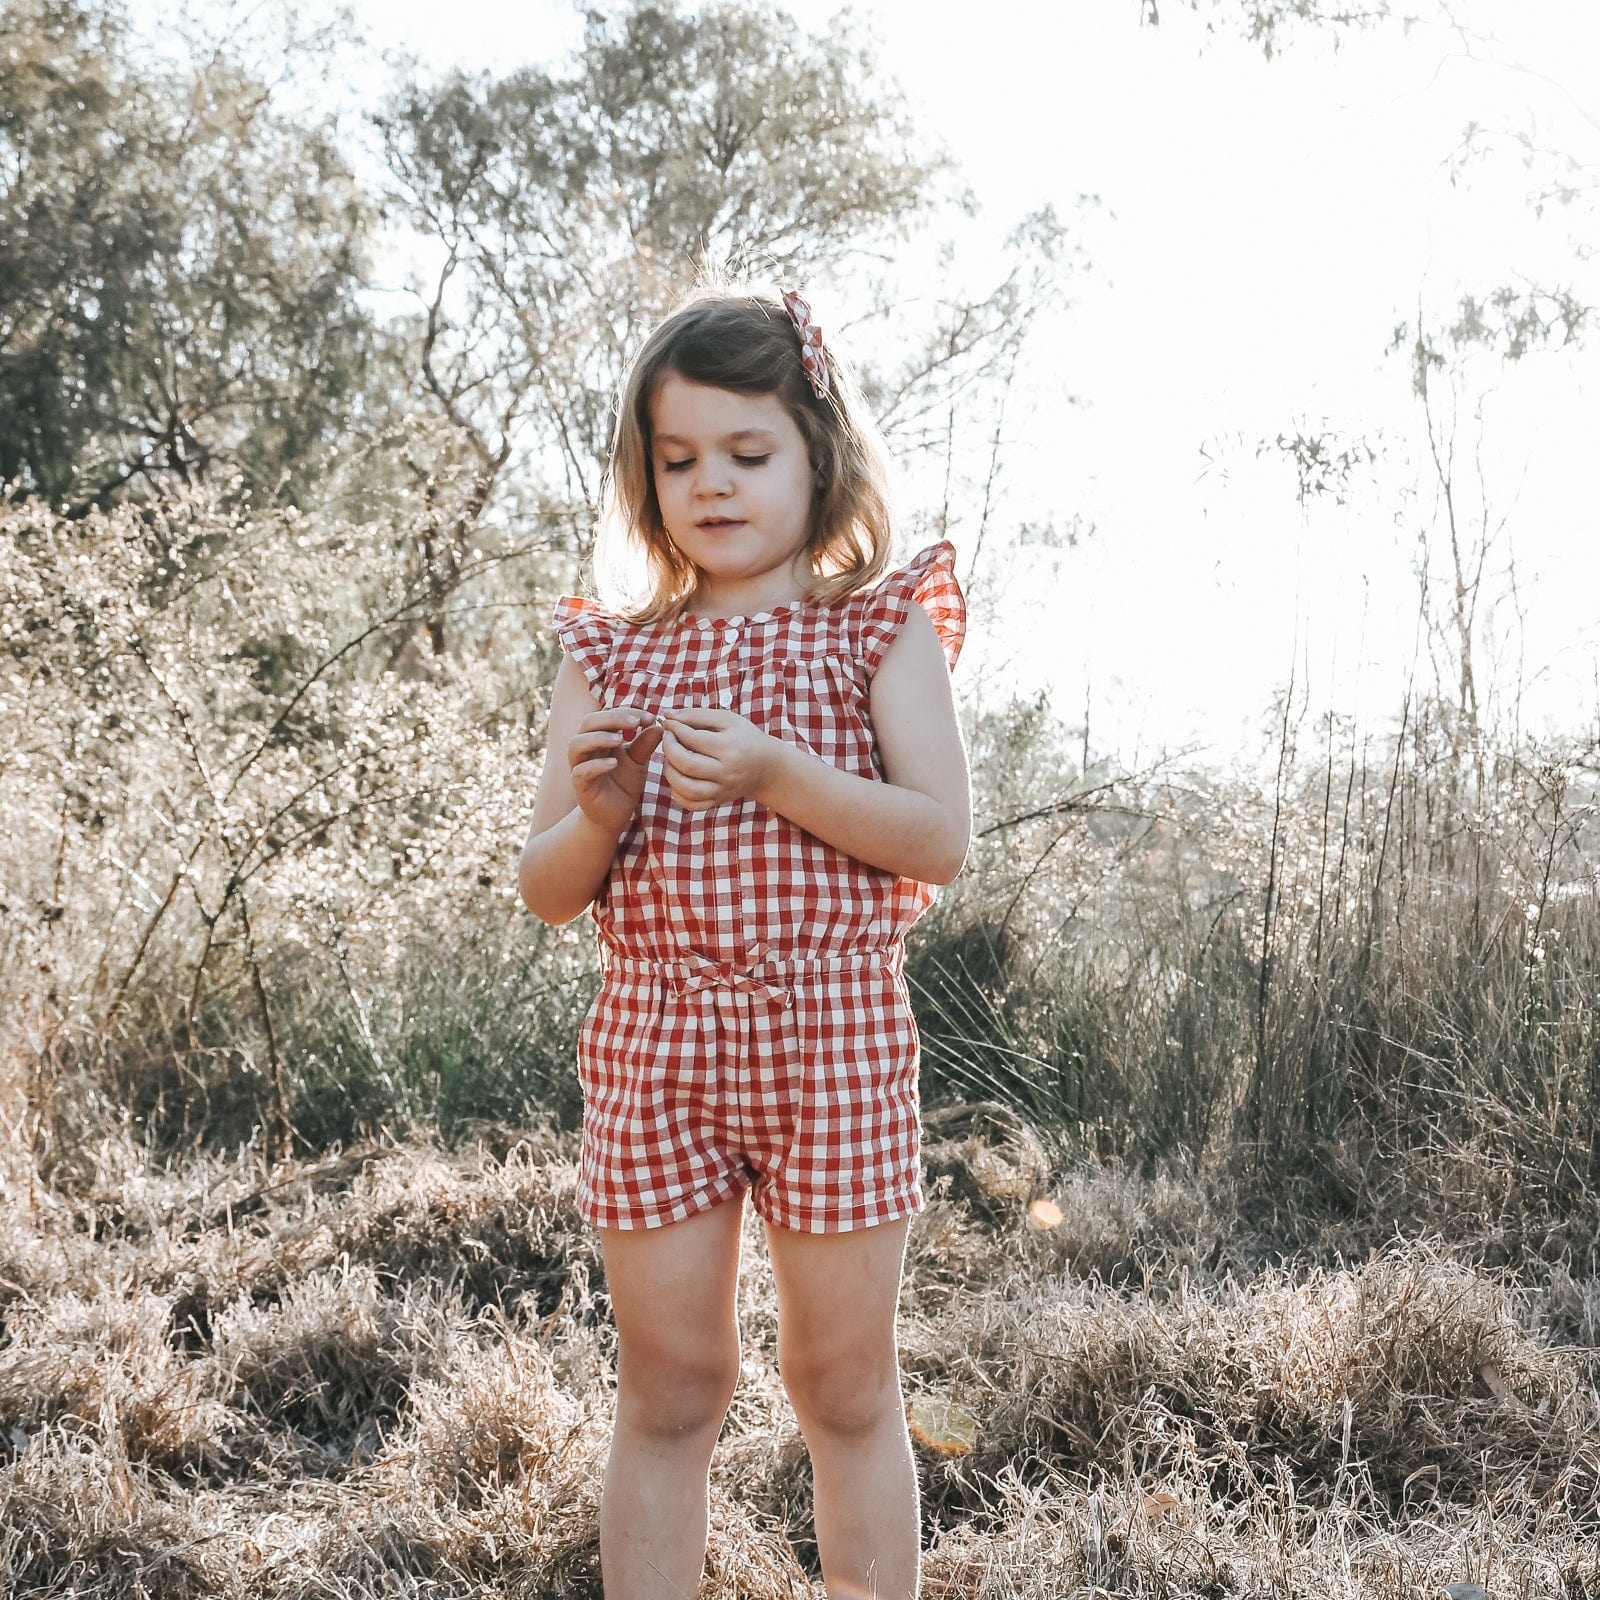 Love Henry Playsuits Girls Chloe Playsuit - Red Check